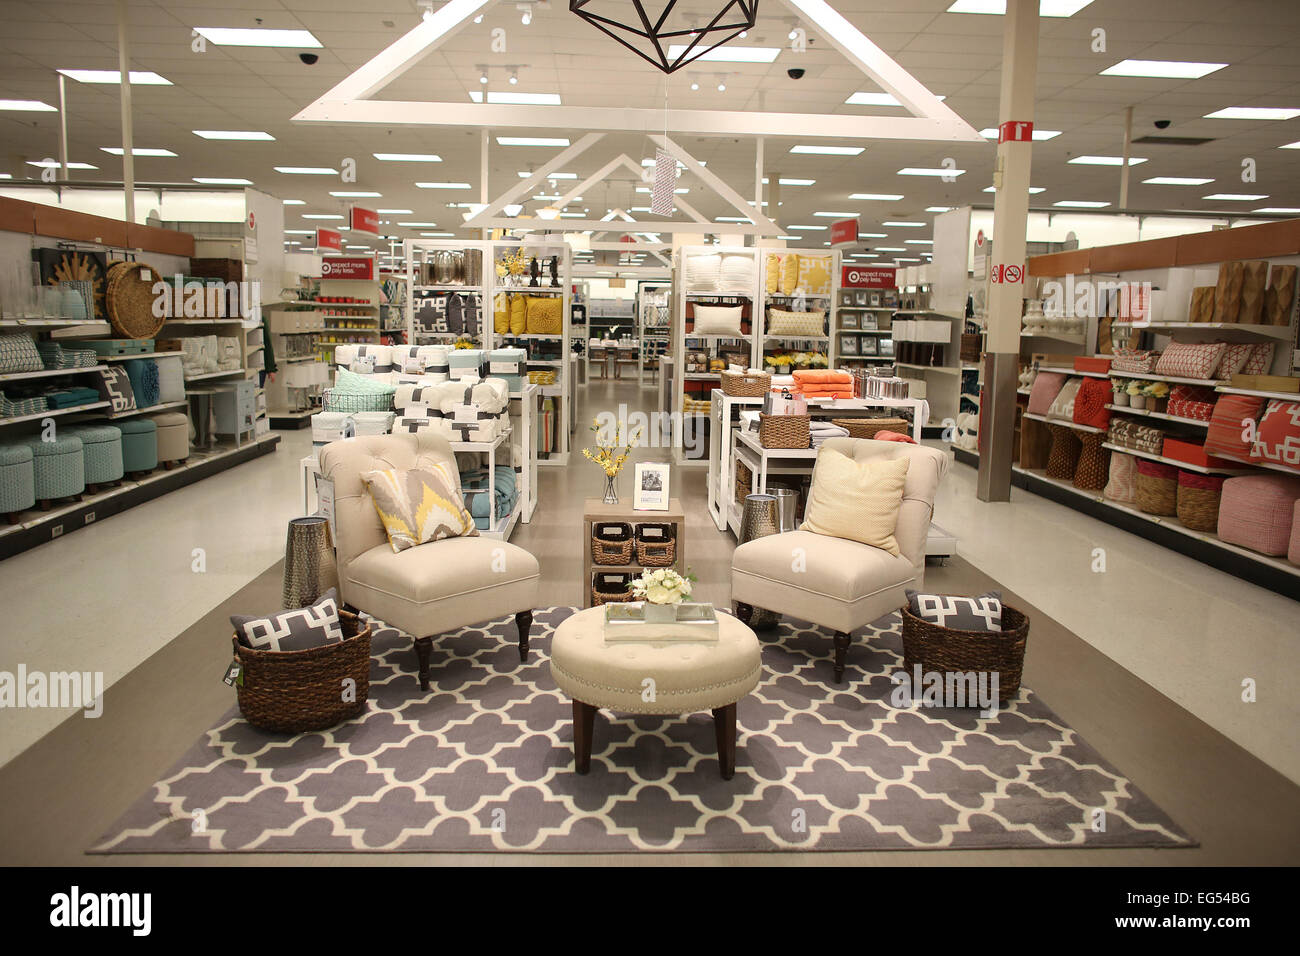 At The Quarry Target The Home Section Has A More Designed, Open Look ...